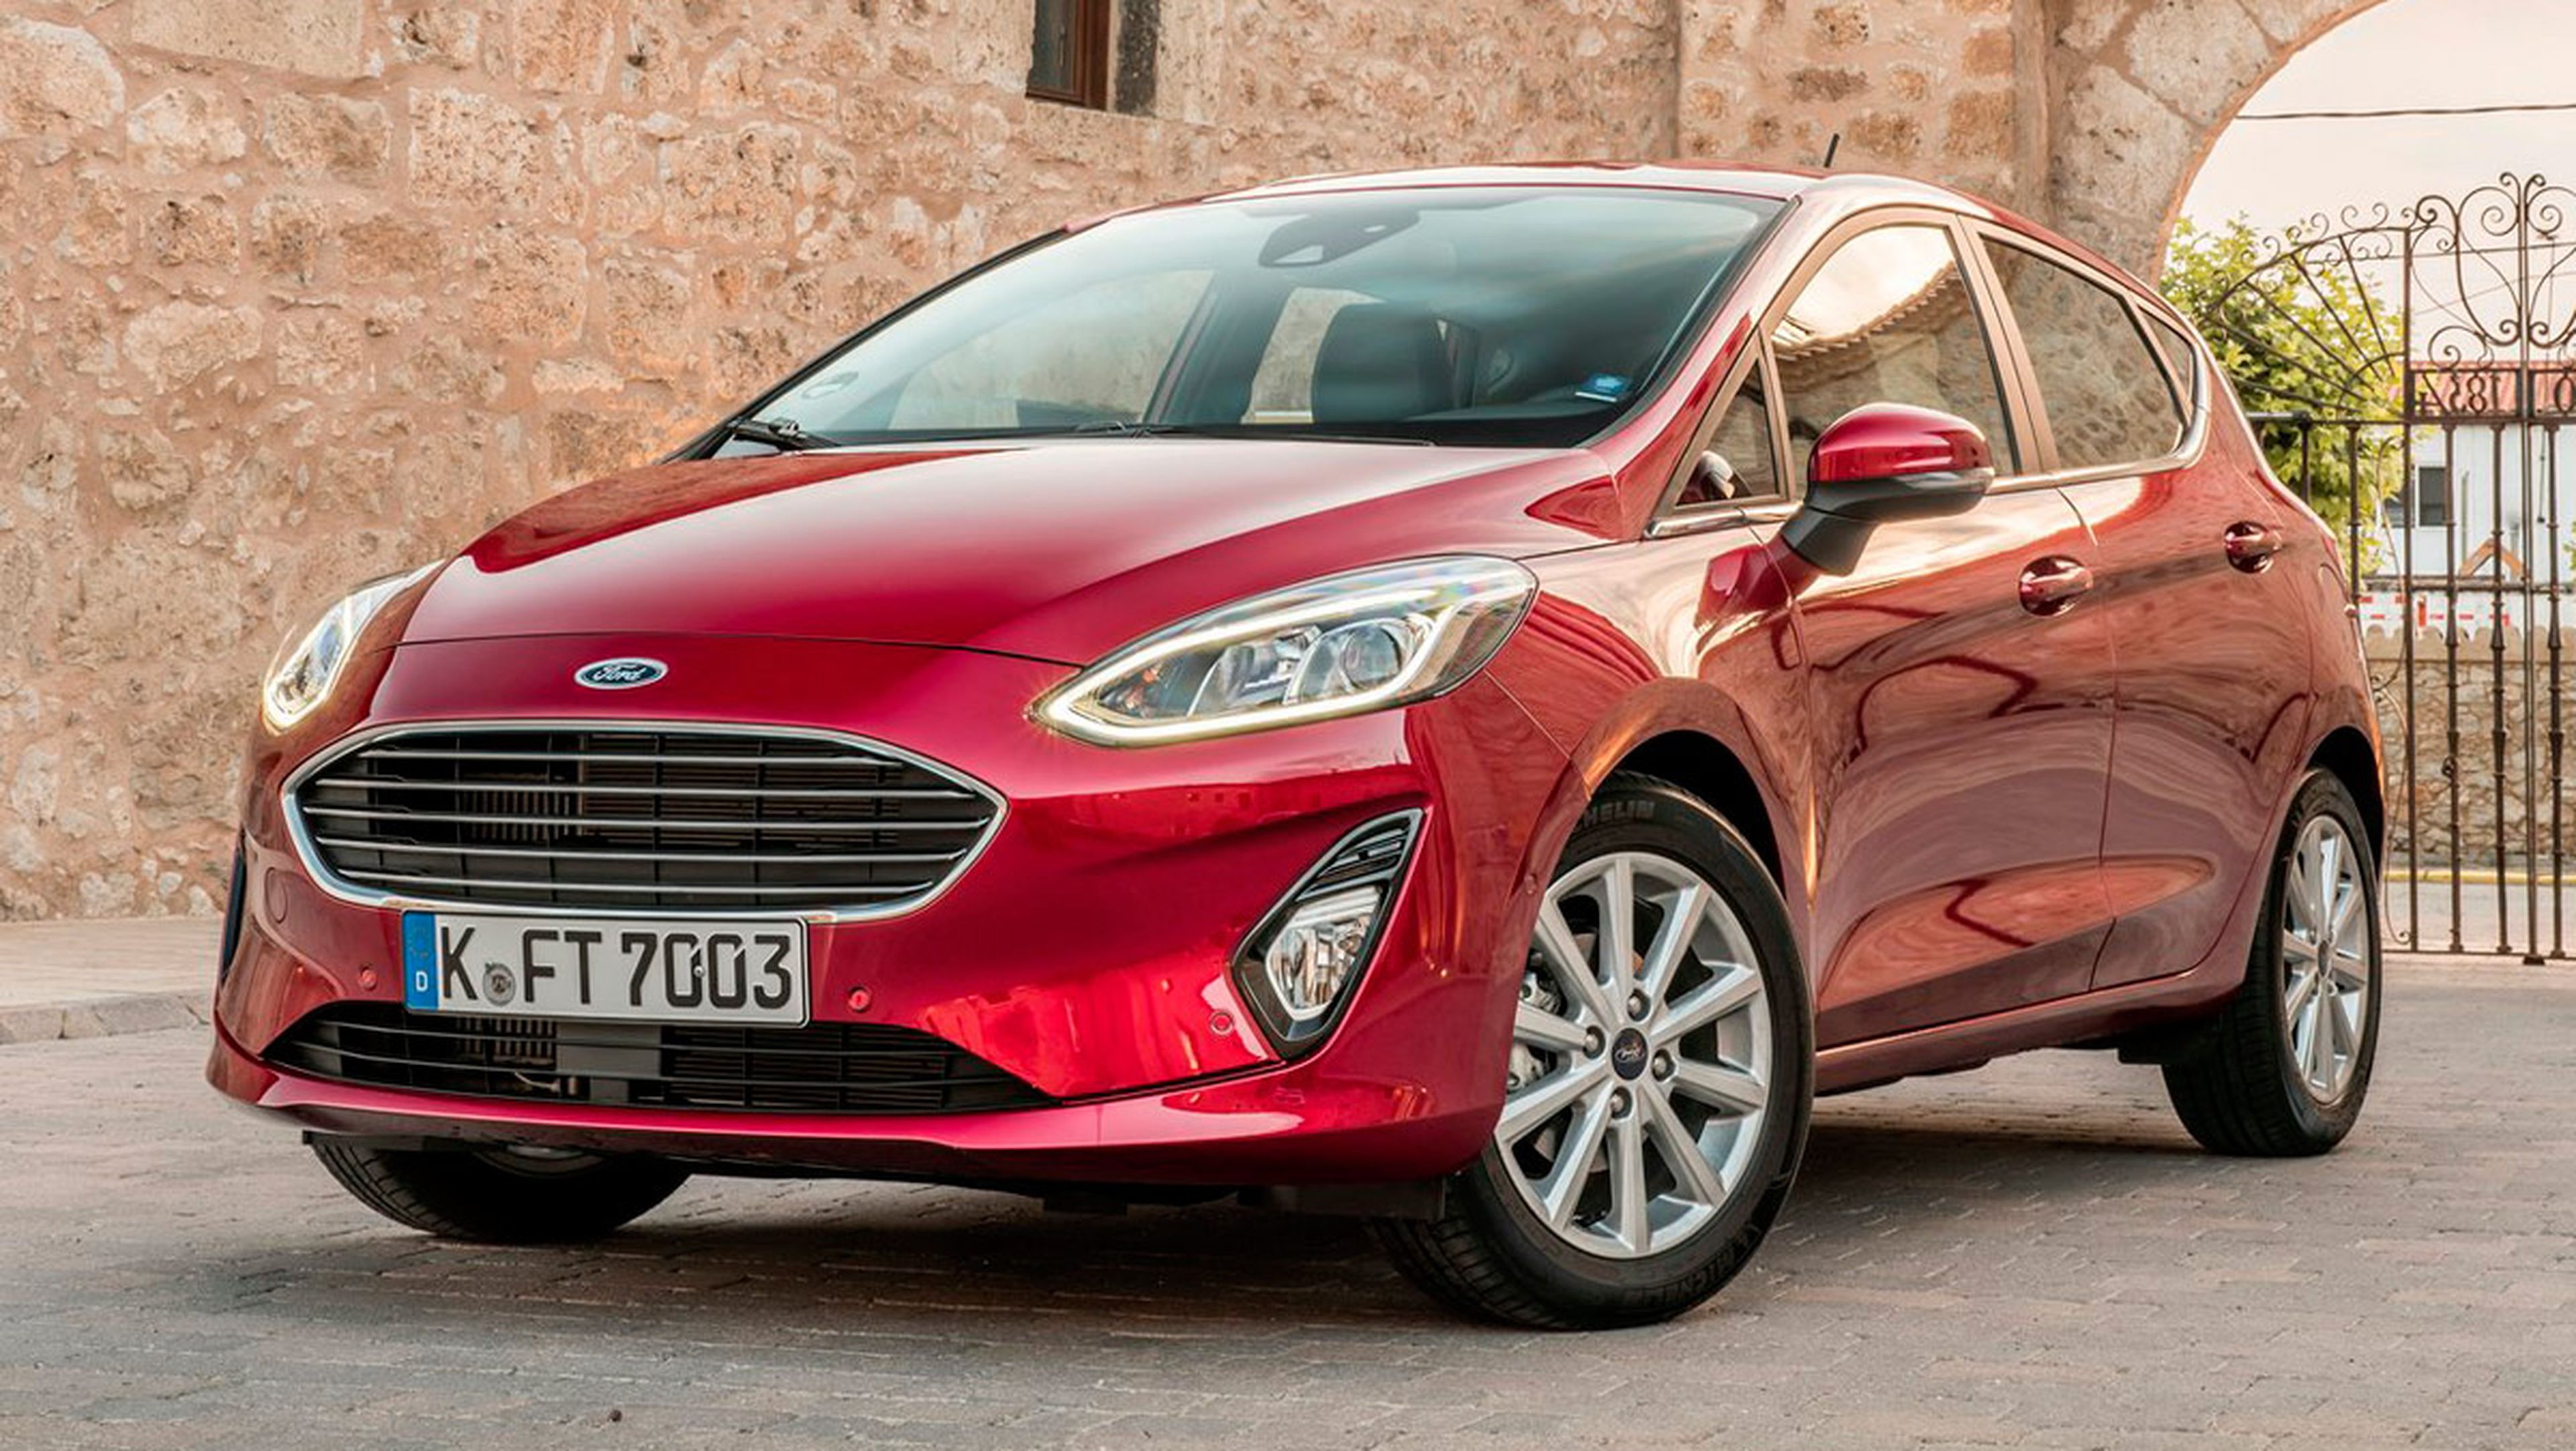 Coches menos fiables: Ford Fiesta (I)